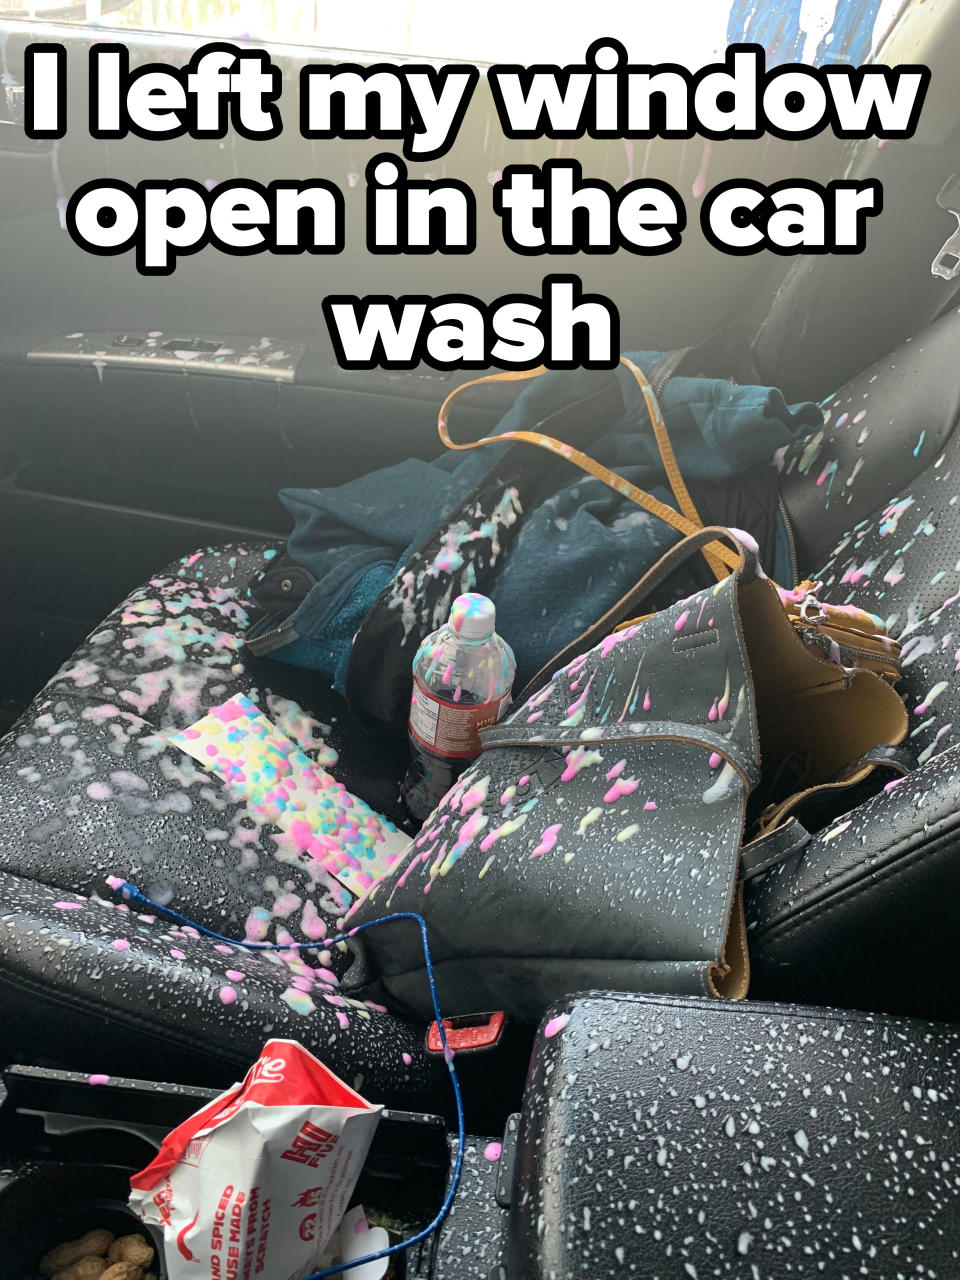 "I left my window open in the car wash."